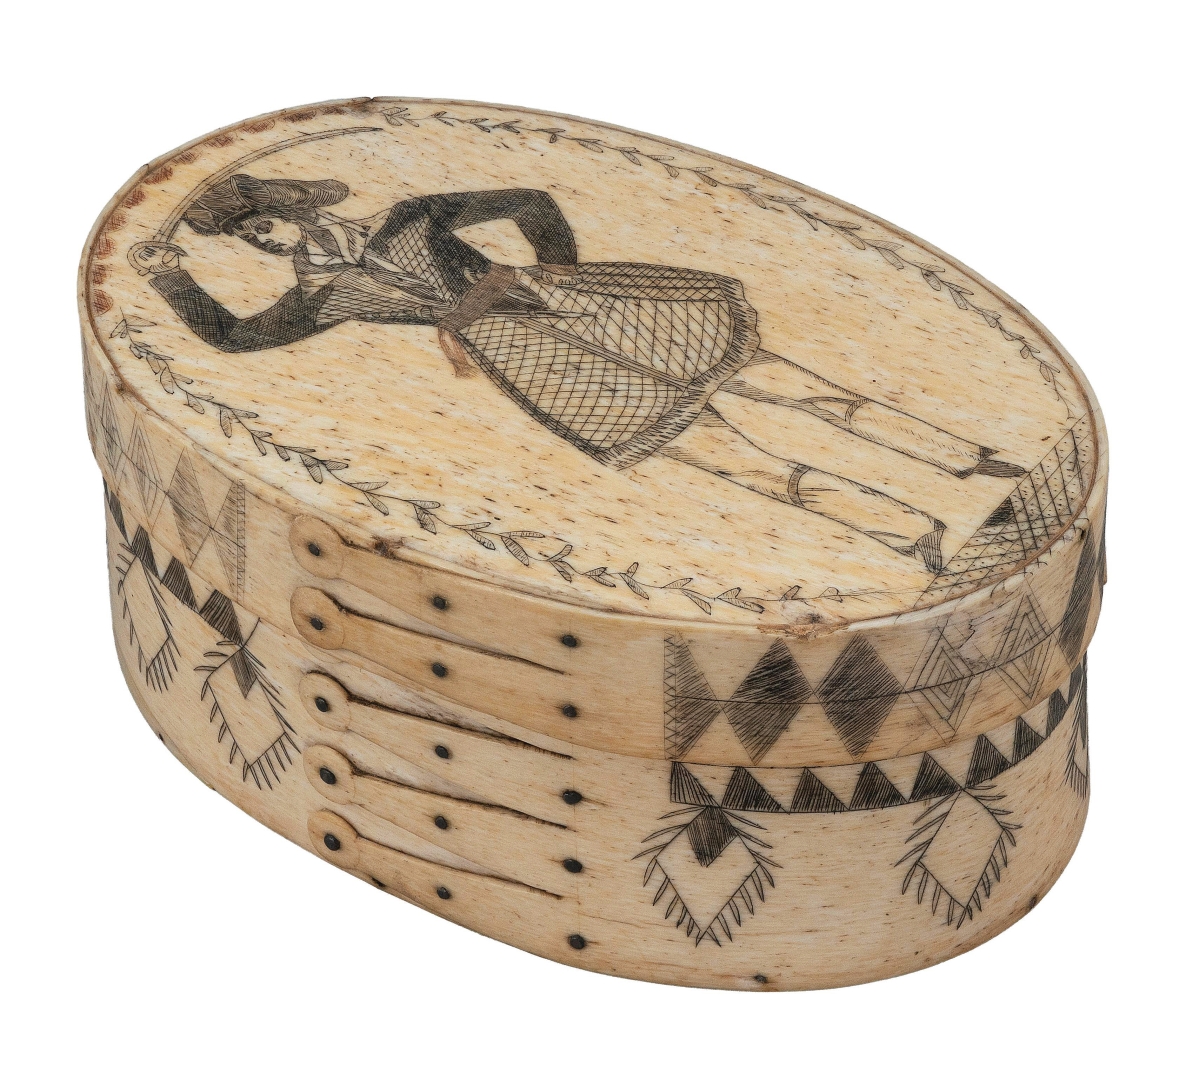 “It’s a very wonderful character, any good Nineteenth Century art does well when she is on it,” said Josh Eldred of Alwilda, the female pirate featured on the top of this whalebone ditty box that brought $50,000.